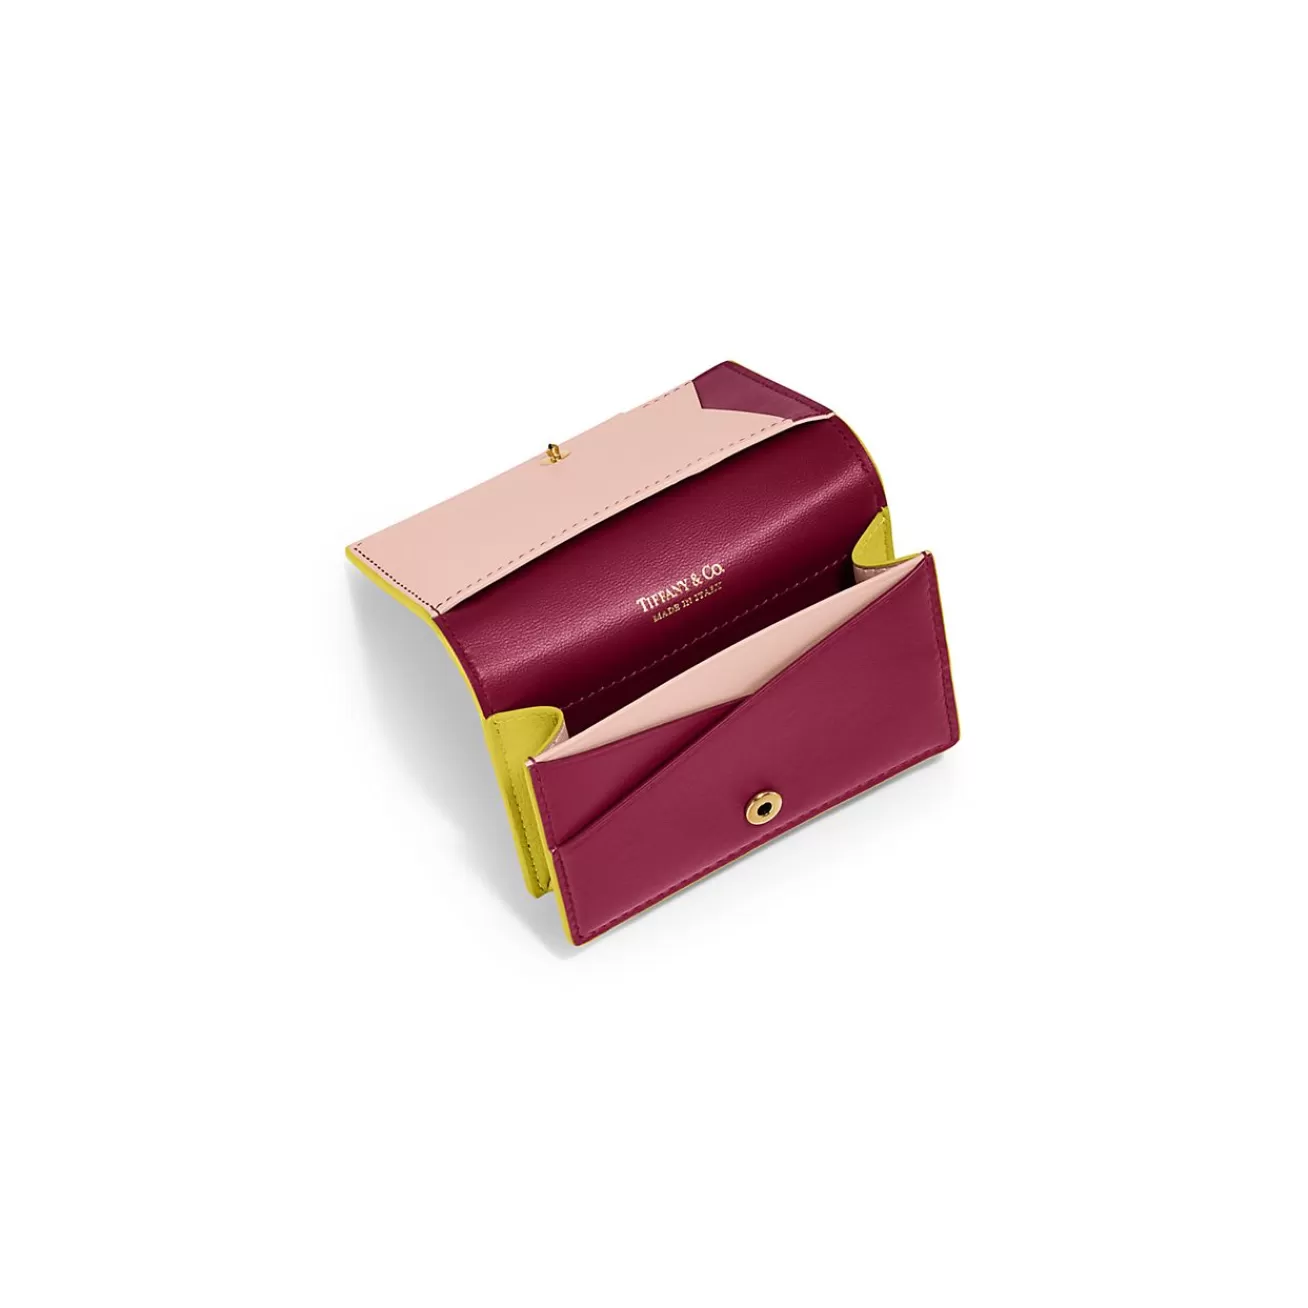 Tiffany & Co. T&CO. Flap Card Holder in Chartreuse Leather | ^Women Small Leather Goods | Women's Accessories